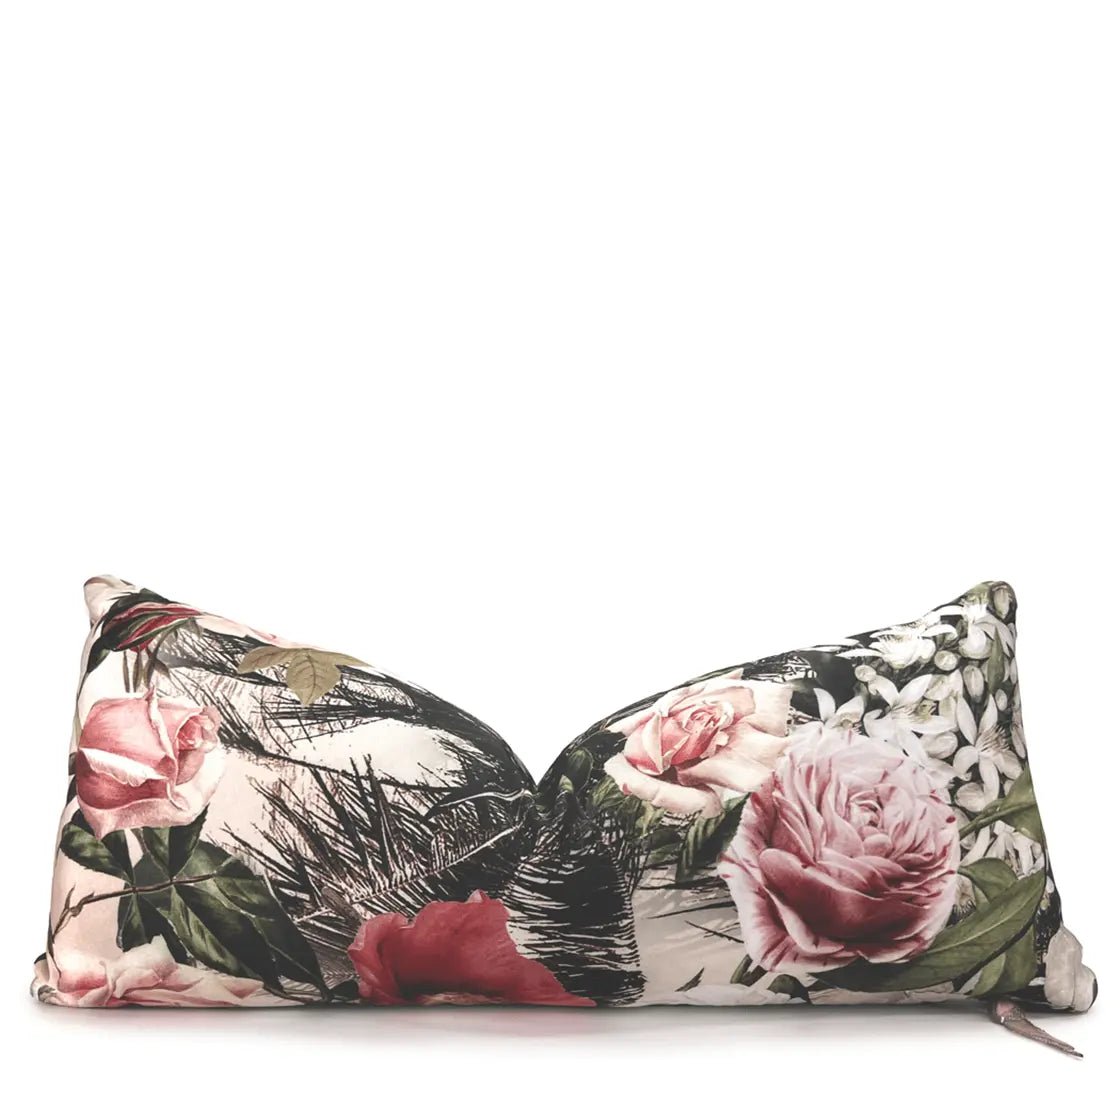 Dior Floral & Leather Pillow - H U N T E D F O X